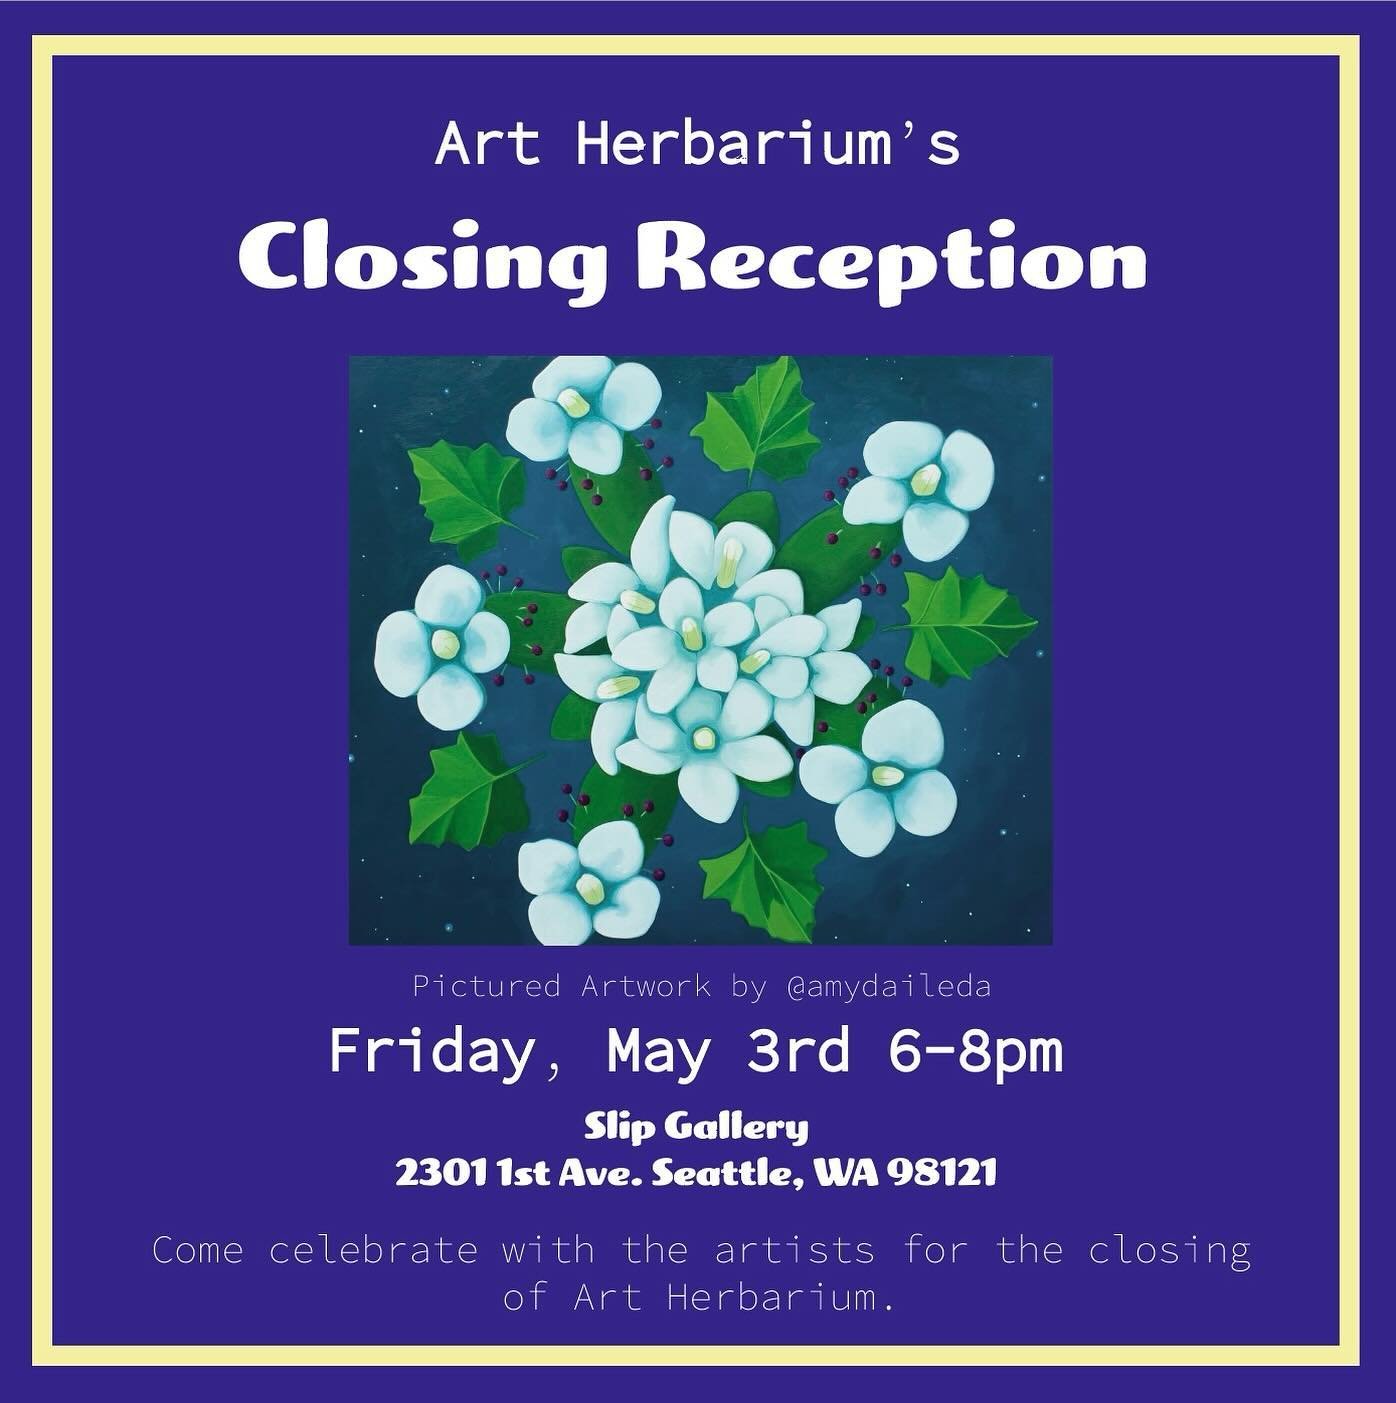 And if you can't make it to the garden party on the 26th, please join us at the closing reception! #flowerpower #seattleartists #artexhibition